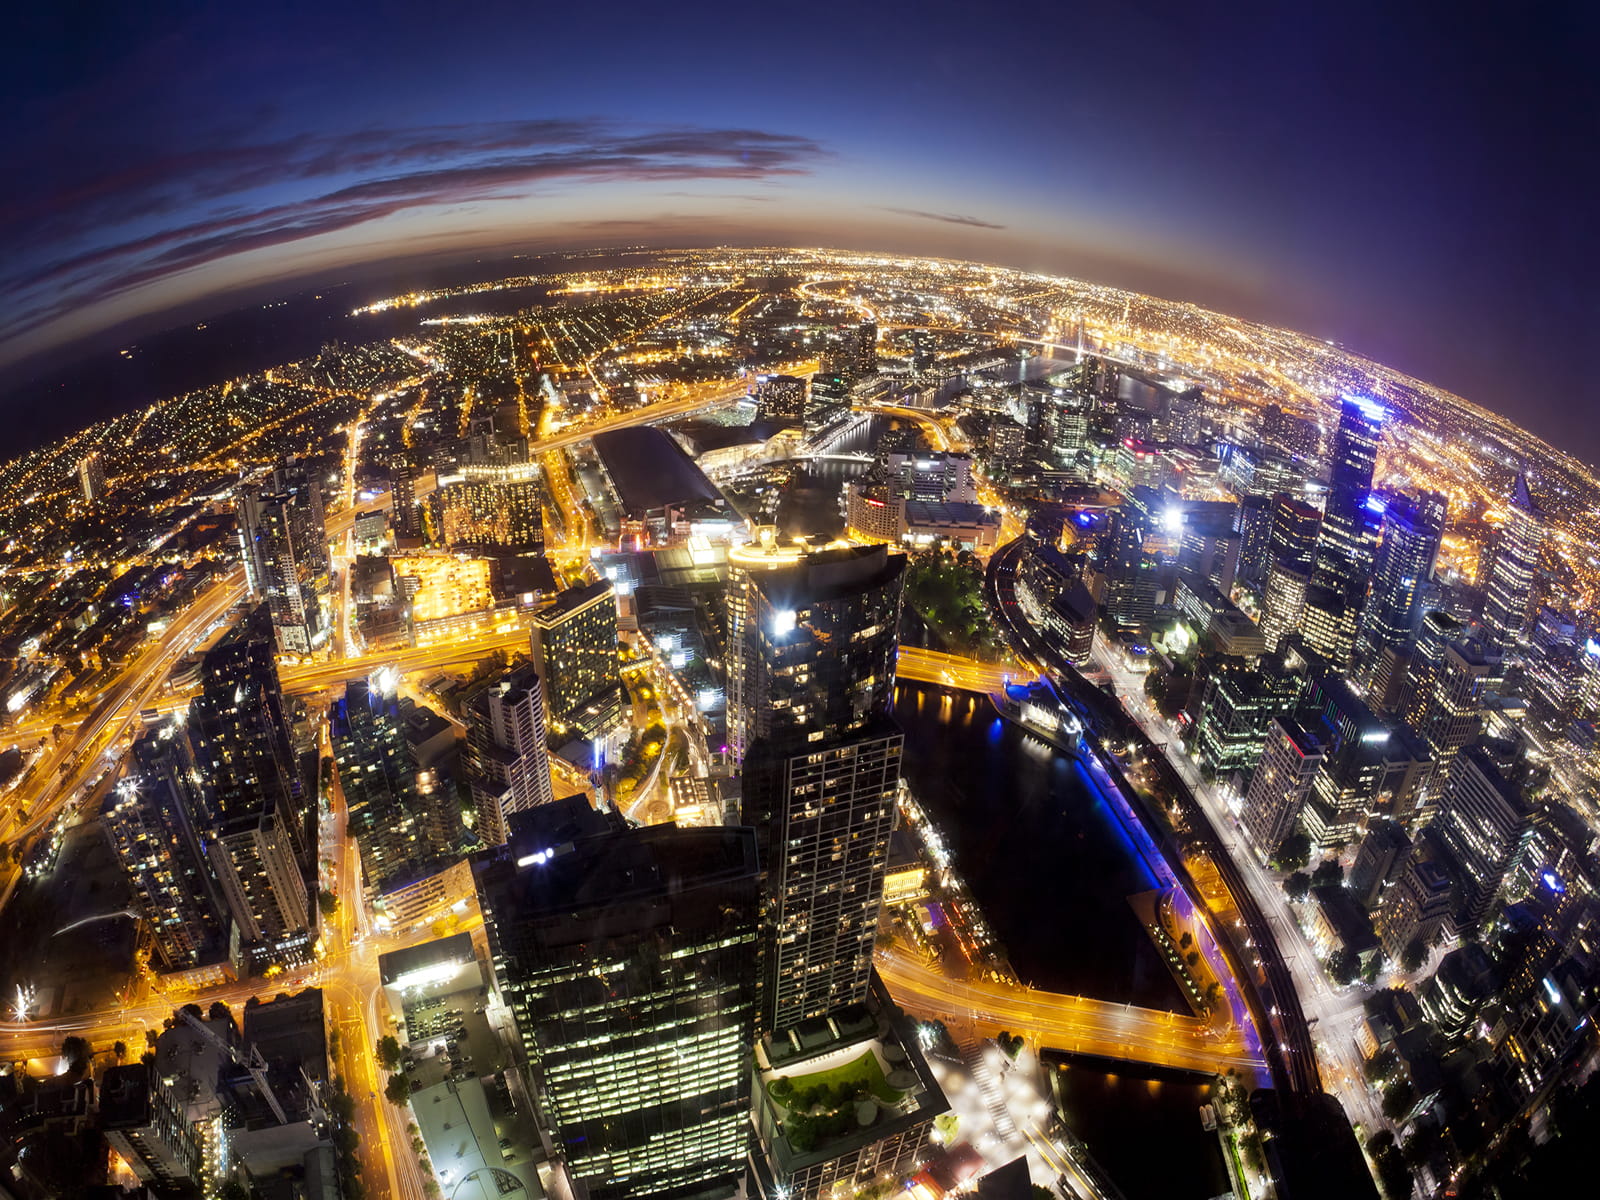 Melbourne at night, fisheye view of city lights